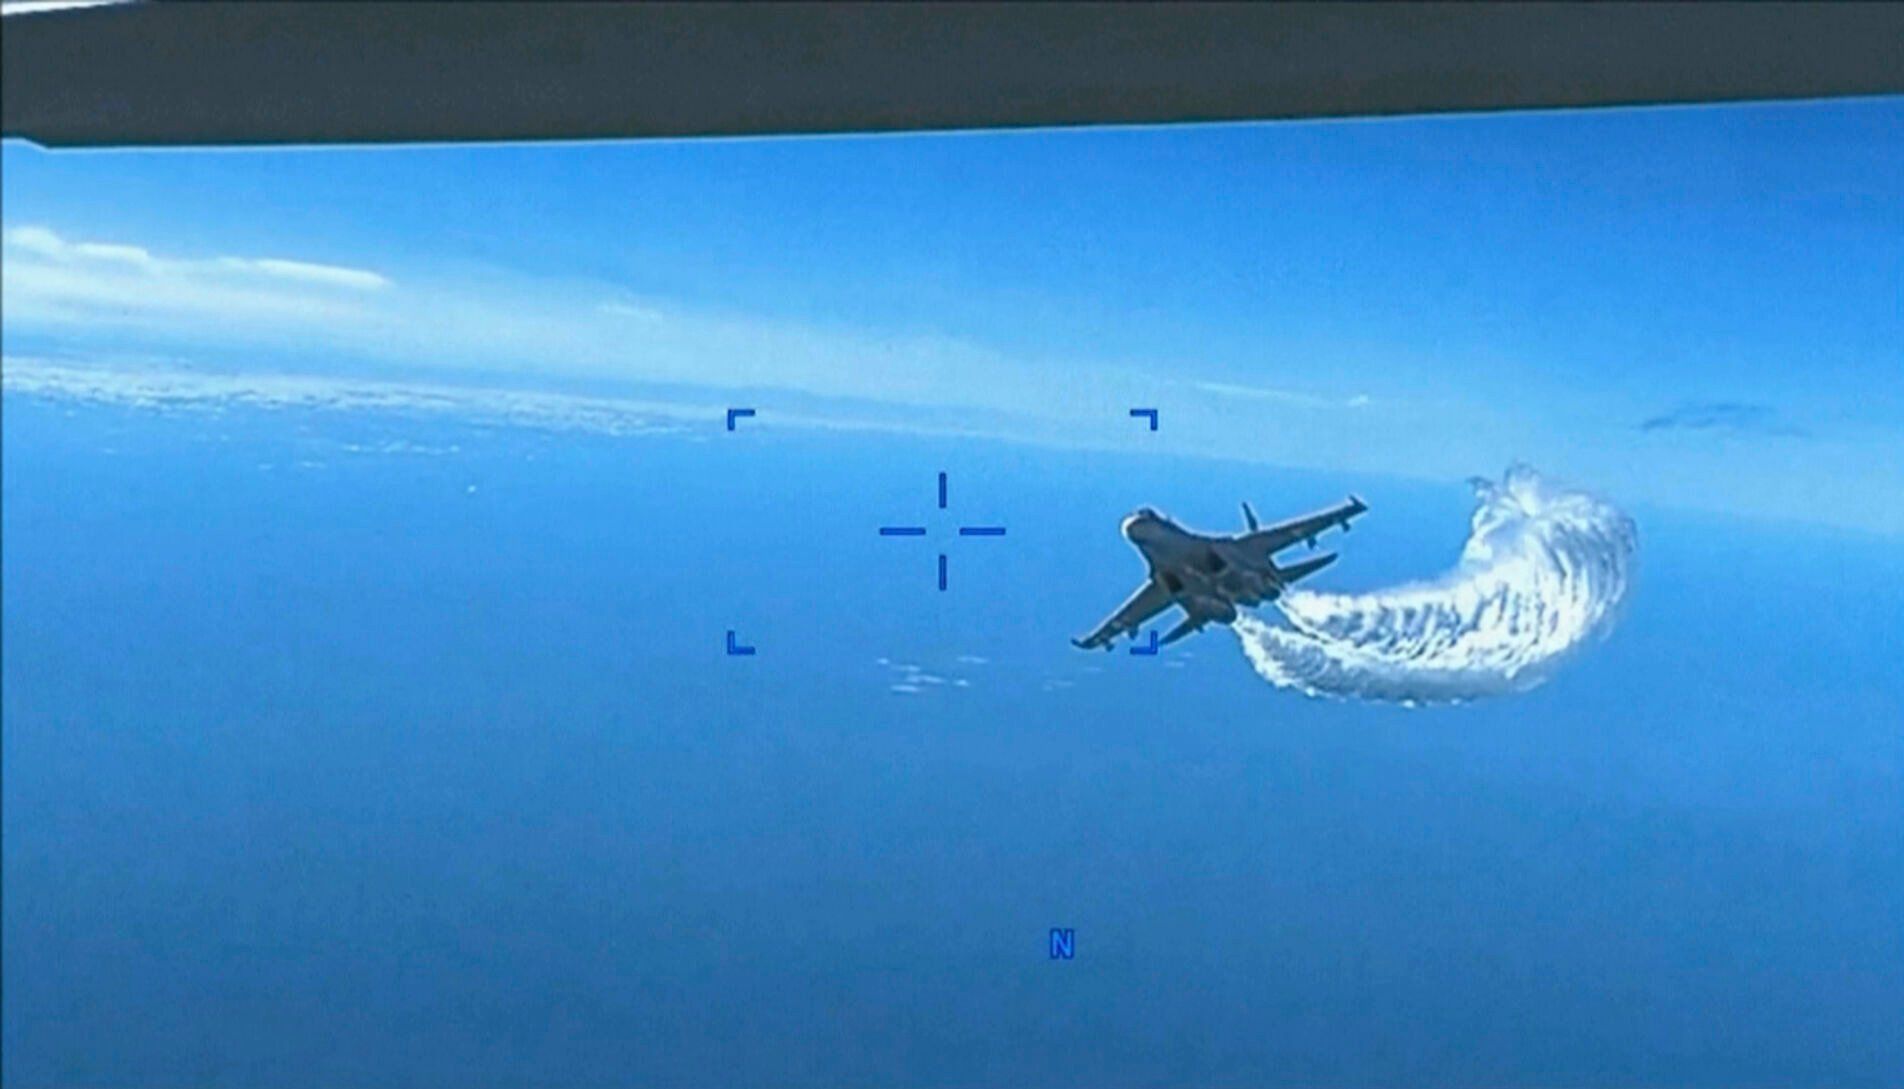 <p>This photo taken from video released on Thursday, March 16, 2023, shows a Russian Su-27 approaching the back of the MQ-9 drone and beginning to release fuel as it passes, over the Black Sea, the Pentagon said. The Pentagon has released footage of what it says is a Russian aircraft conducting an unsafe intercept of a U.S. Air Force surveillance drone in international airspace over the Black Sea. (US Department of Defense via AP)</p>   PHOTO CREDIT: U.S. Department of Defense